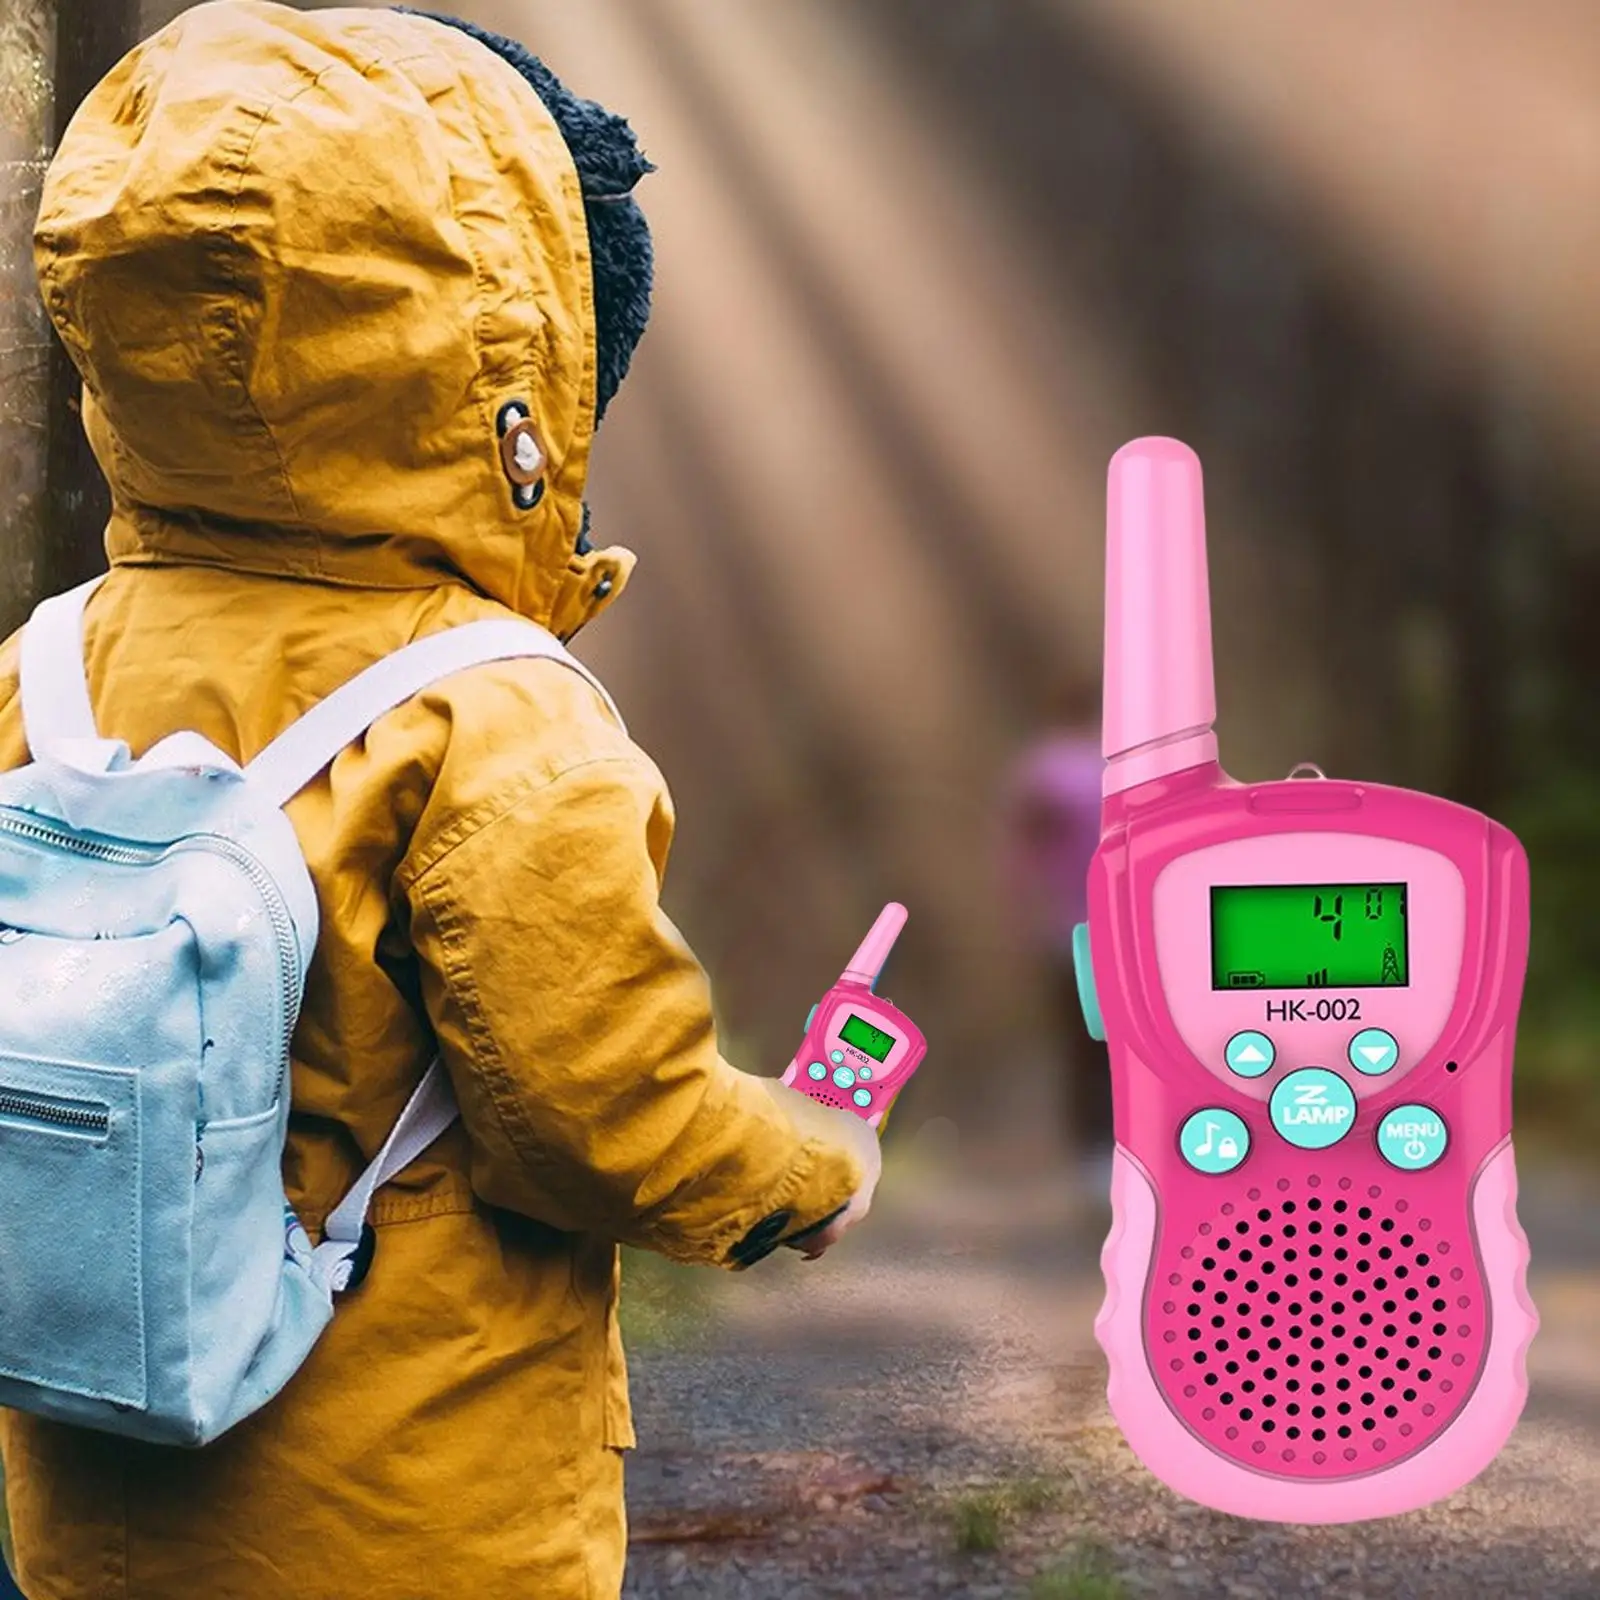 2Pcs Kids Walkie Talkie with Belt Clip Long Distance 2km Present Outdoor Toy for Games 3-14 Years Old Boys Girls Indoor Outdoor